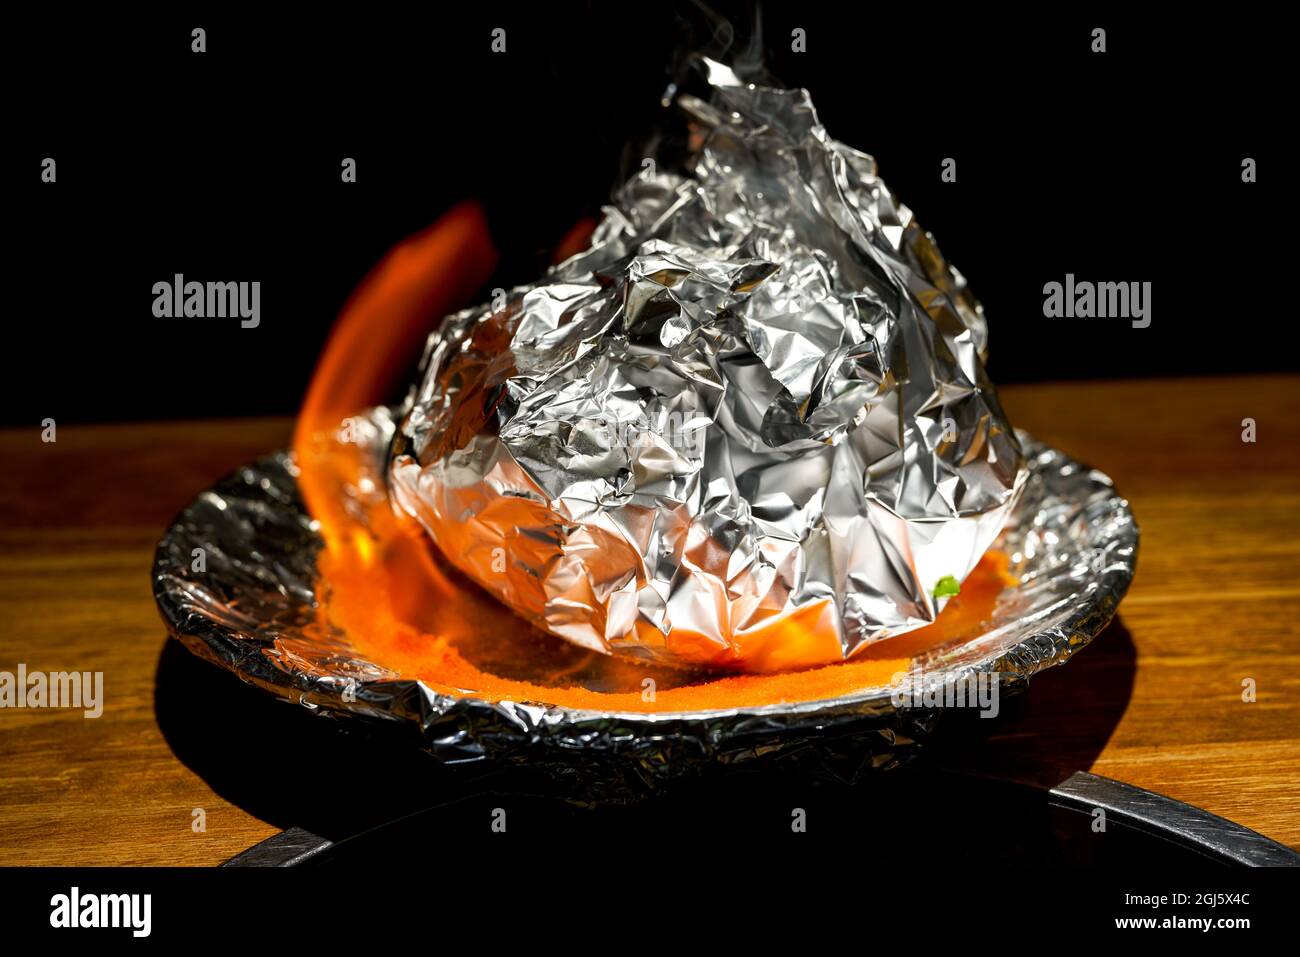 A braised pork ribs in tin foil fired with alcohol Stock Photo